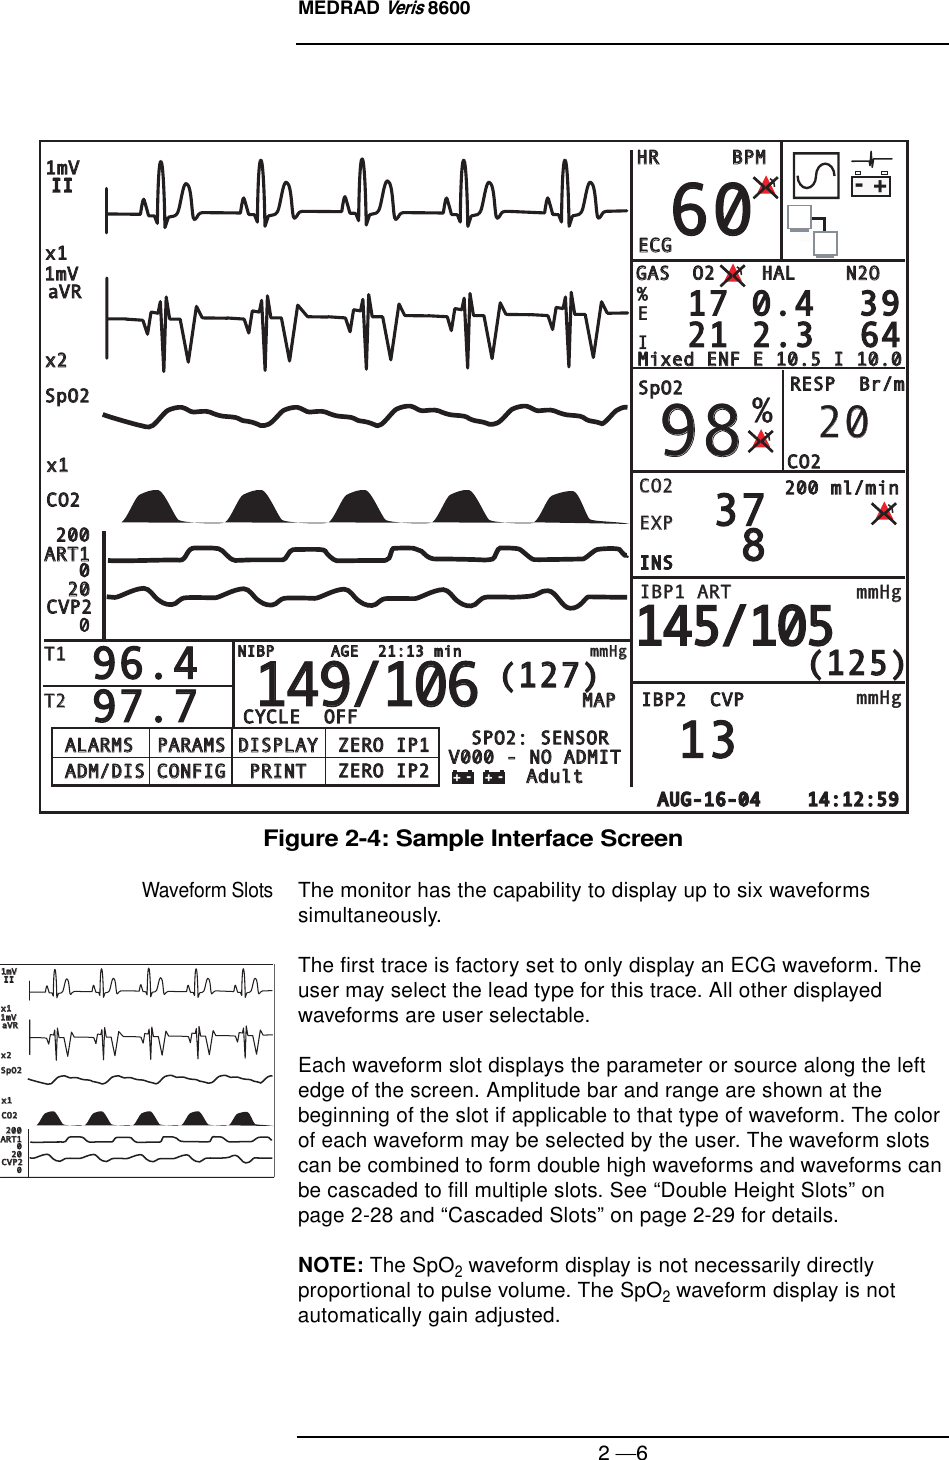 MEDRAD Veris 86002 —6Figure 2-4: Sample Interface ScreenWaveform SlotsThe monitor has the capability to display up to six waveforms simultaneously.The first trace is factory set to only display an ECG waveform. The user may select the lead type for this trace. All other displayed waveforms are user selectable.Each waveform slot displays the parameter or source along the left edge of the screen. Amplitude bar and range are shown at the beginning of the slot if applicable to that type of waveform. The color of each waveform may be selected by the user. The waveform slots can be combined to form double high waveforms and waveforms can be cascaded to fill multiple slots. See “Double Height Slots” on page 2-28 and “Cascaded Slots” on page 2-29 for details.NOTE: The SpO2 waveform display is not necessarily directly proportional to pulse volume. The SpO2 waveform display is not automatically gain adjusted.ALARMS  PARAMS DISPLAYALARMS  PARAMS DISPLAYAdultAdultV000 - NO ADMITV000 - NO ADMITSPO2: SENSORSPO2: SENSORZERO IP1ZERO IP1ZERO IP2ZERO IP2ADM/DIS CONFIG  PRINTADM/DIS CONFIG  PRINTAUG-16-04    14:12:59AUG-16-04    14:12:59SpO2SpO2IIII002020T1T1T2T2%x1x1x1x1x2x2aVRaVRCO2CO2CO2CO2EXPEXPINSINSINSINSINSINSMAPMAPCYCLE  OFFCYCLE  OFF2002001mV1mVECGECGSpO2SpO2IBP1 ARTIBP1 ARTmmHgmmHgmmHgmmHg200 ml/min200 ml/minIBP2  CVPIBP2  CVPHRHRBPMBPMRESP  Br/mRESP  Br/m1mV1mV606098983737 8 896.496.497.797.720201313(125)(125)O2    HALO2    HALGASGASN2ON2OEI17 0.4  3917 0.4  3921 2.3  6421 2.3  64145/105145/105ART1ART1CVP2CVP2149/106149/106(127)(127)CO2CO2- +NIBP      AGE  21:13 minNIBP      AGE  21:13 minmmHgmmHg%Mixed ENF E 10.5 I 10.0Mixed ENF E 10.5 I 10.0- + - +SpO2SpO2IIII002020x1x1x1x1x2x2aVRaVRCO2CO22002001mV1mV1mV1mVART1ART1CVP2CVP2